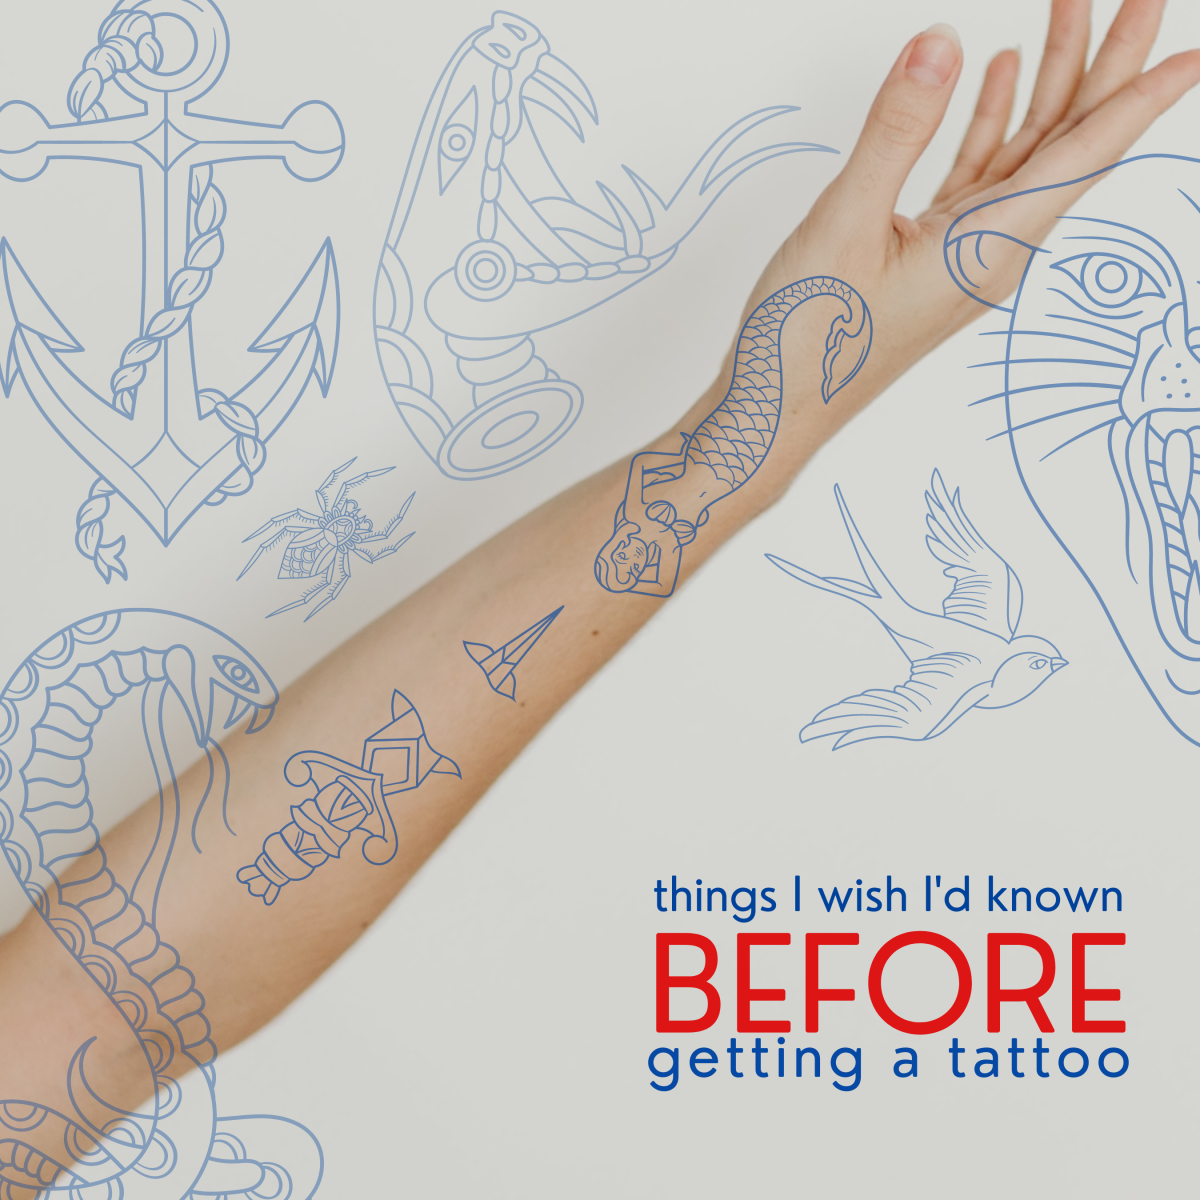 9 Things I Wish I’d Known Before I Got a Tattoo